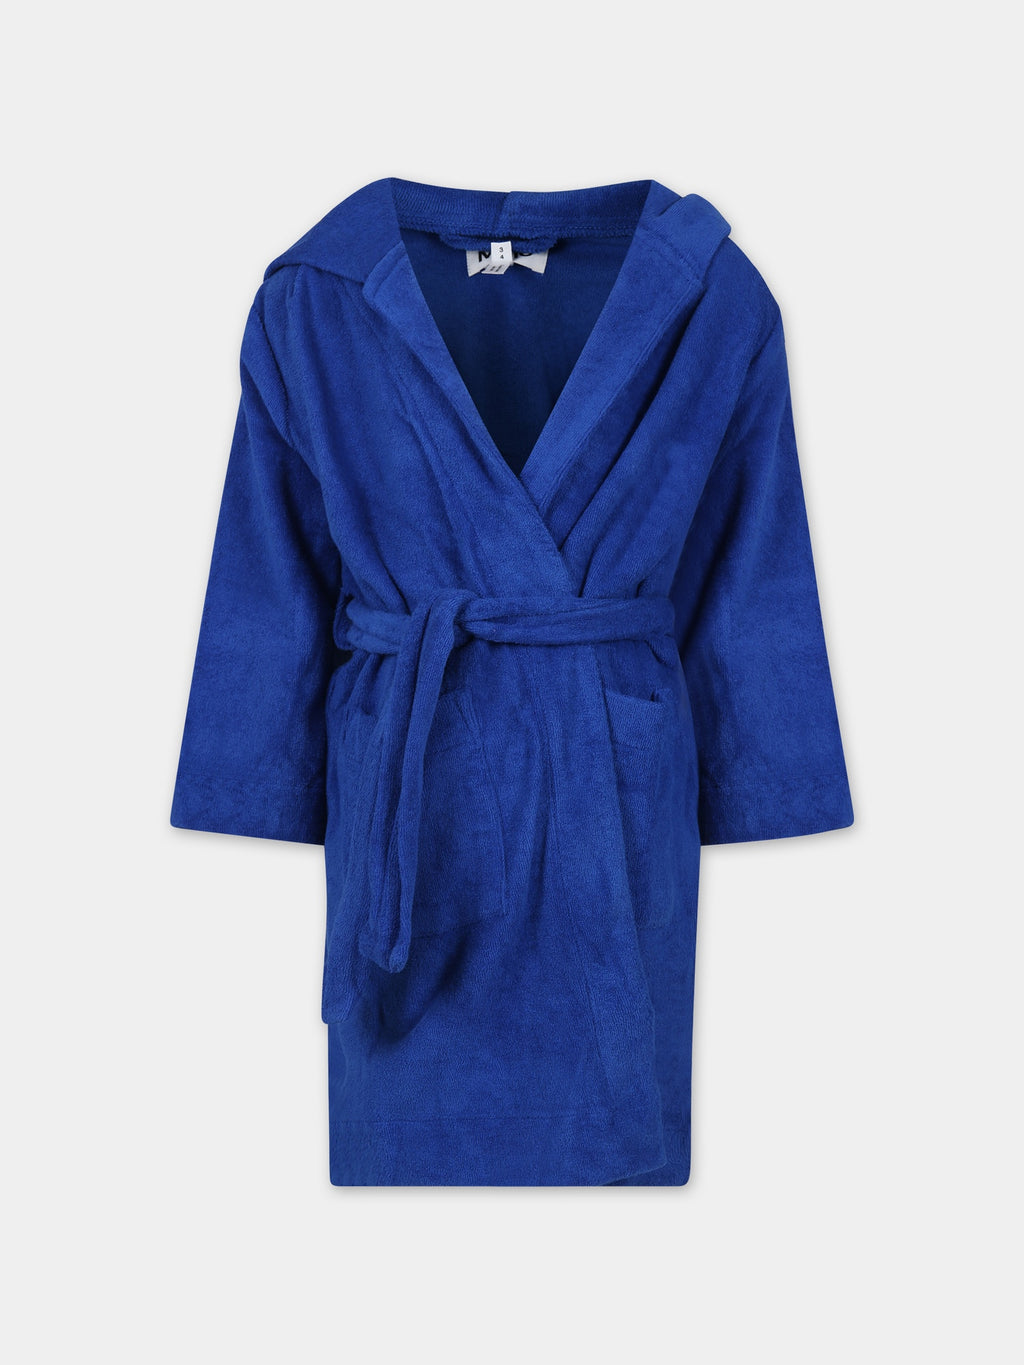 Blue dressing gown for kids